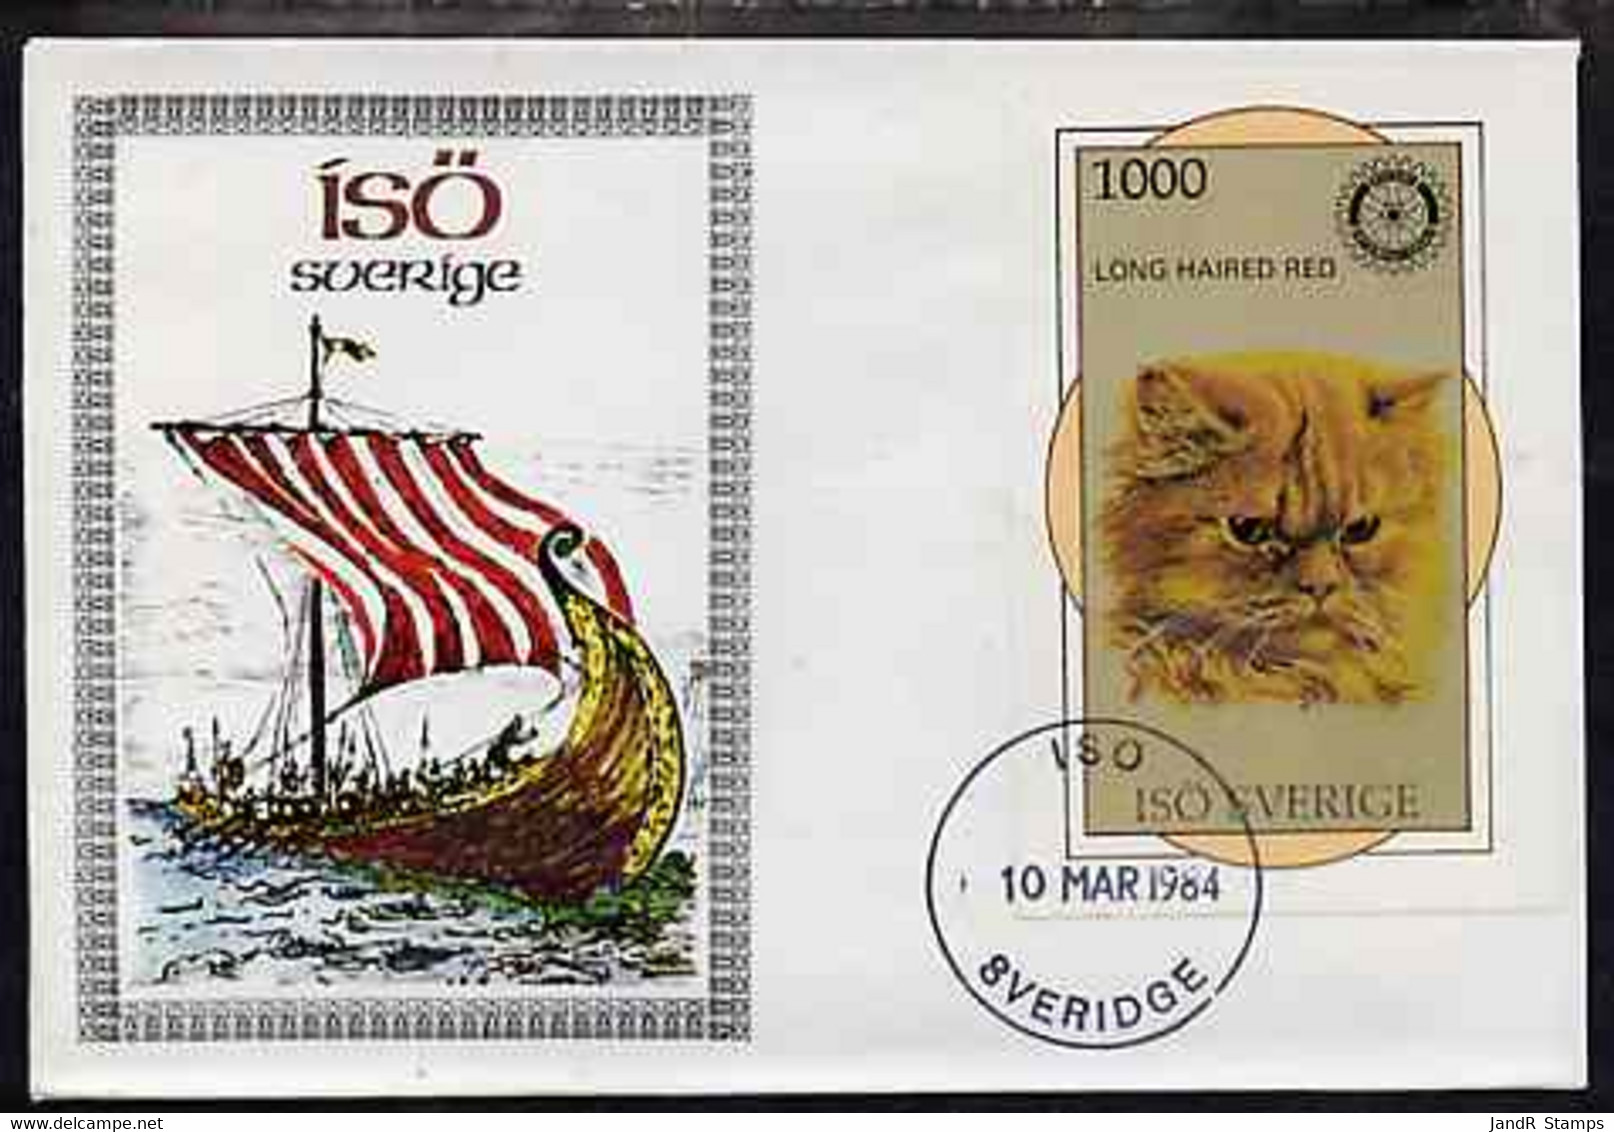 Iso - Sweden 1984 Rotary - Domestic Cats (Long Haired Red) Imperf Deluxe Sheet (1000 Value) On Cover With First Day Canc - Emissions Locales